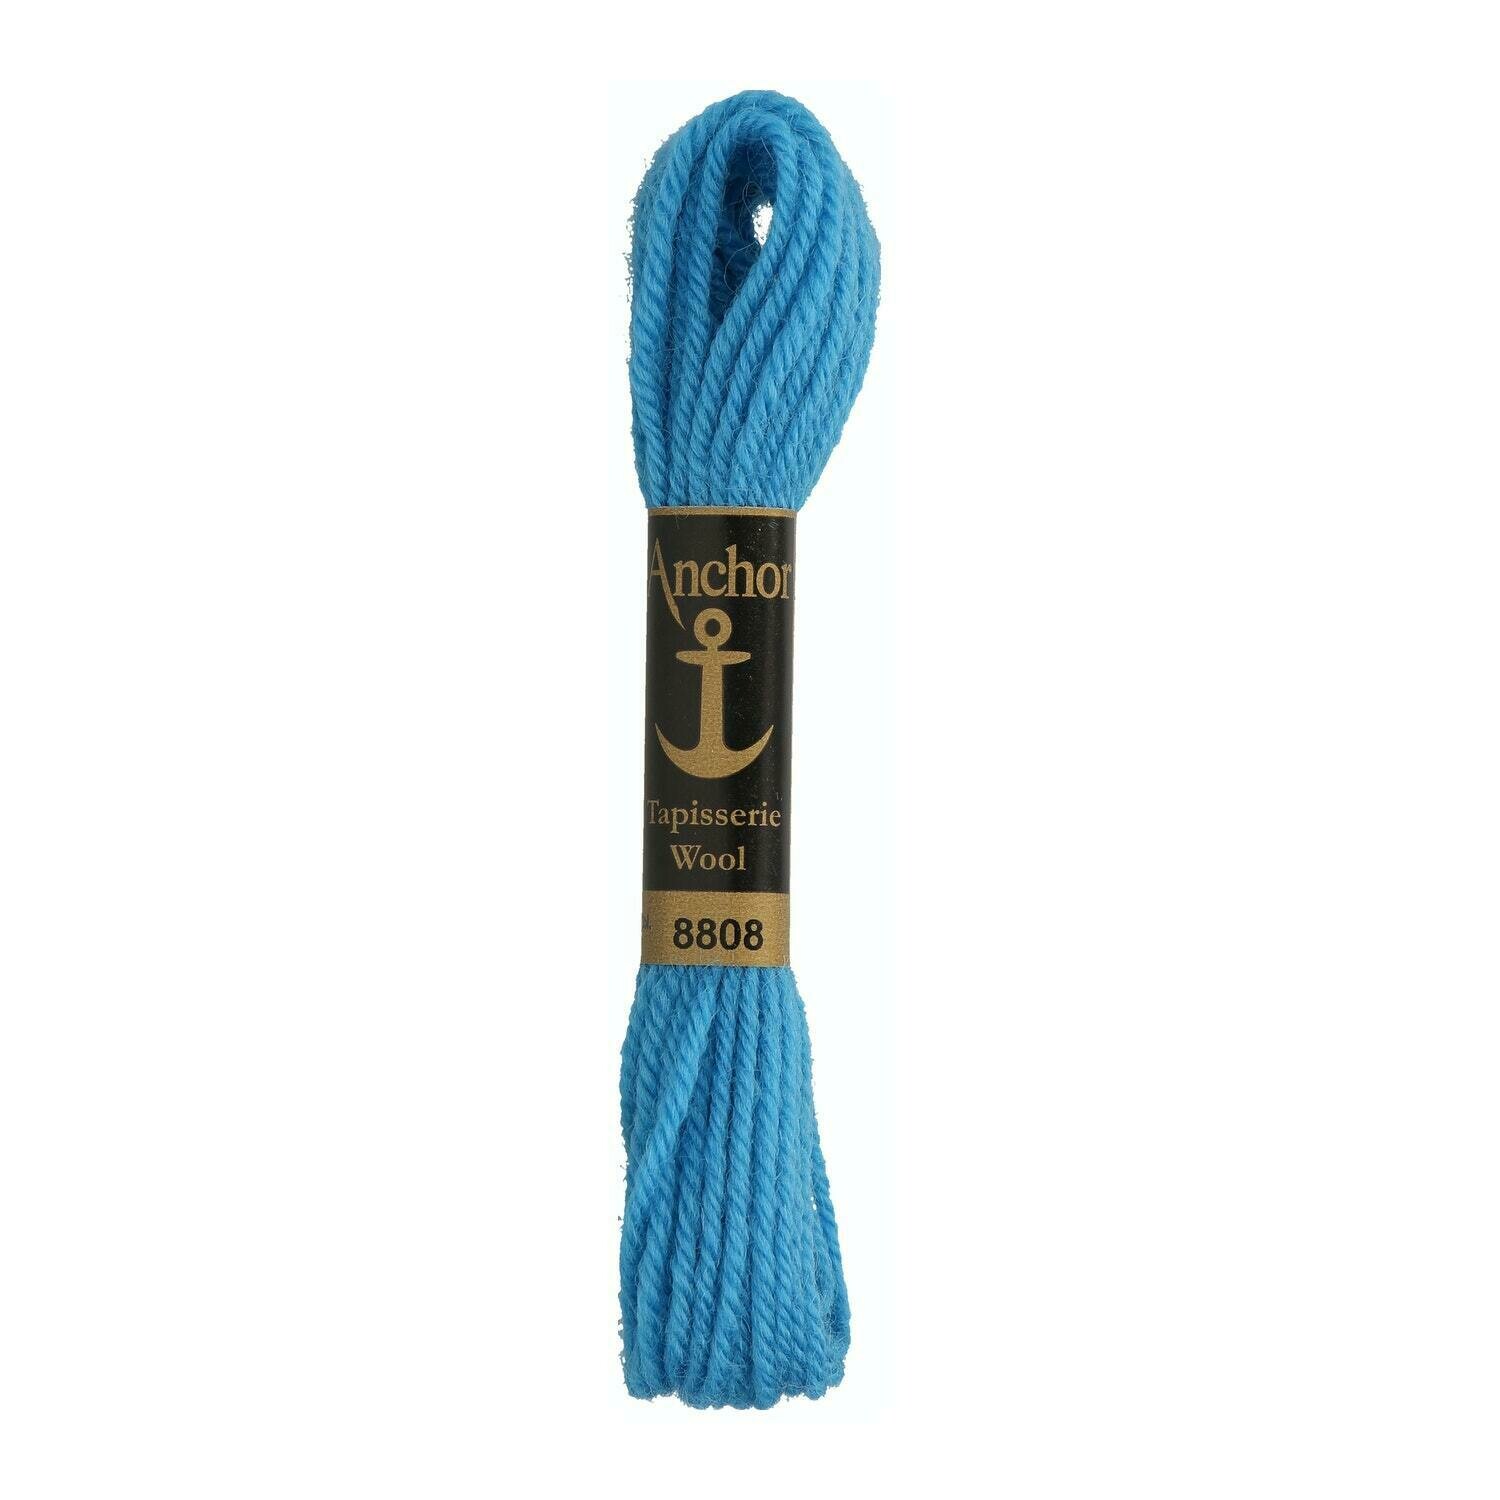 Anchor Tapisserie Wool #08808